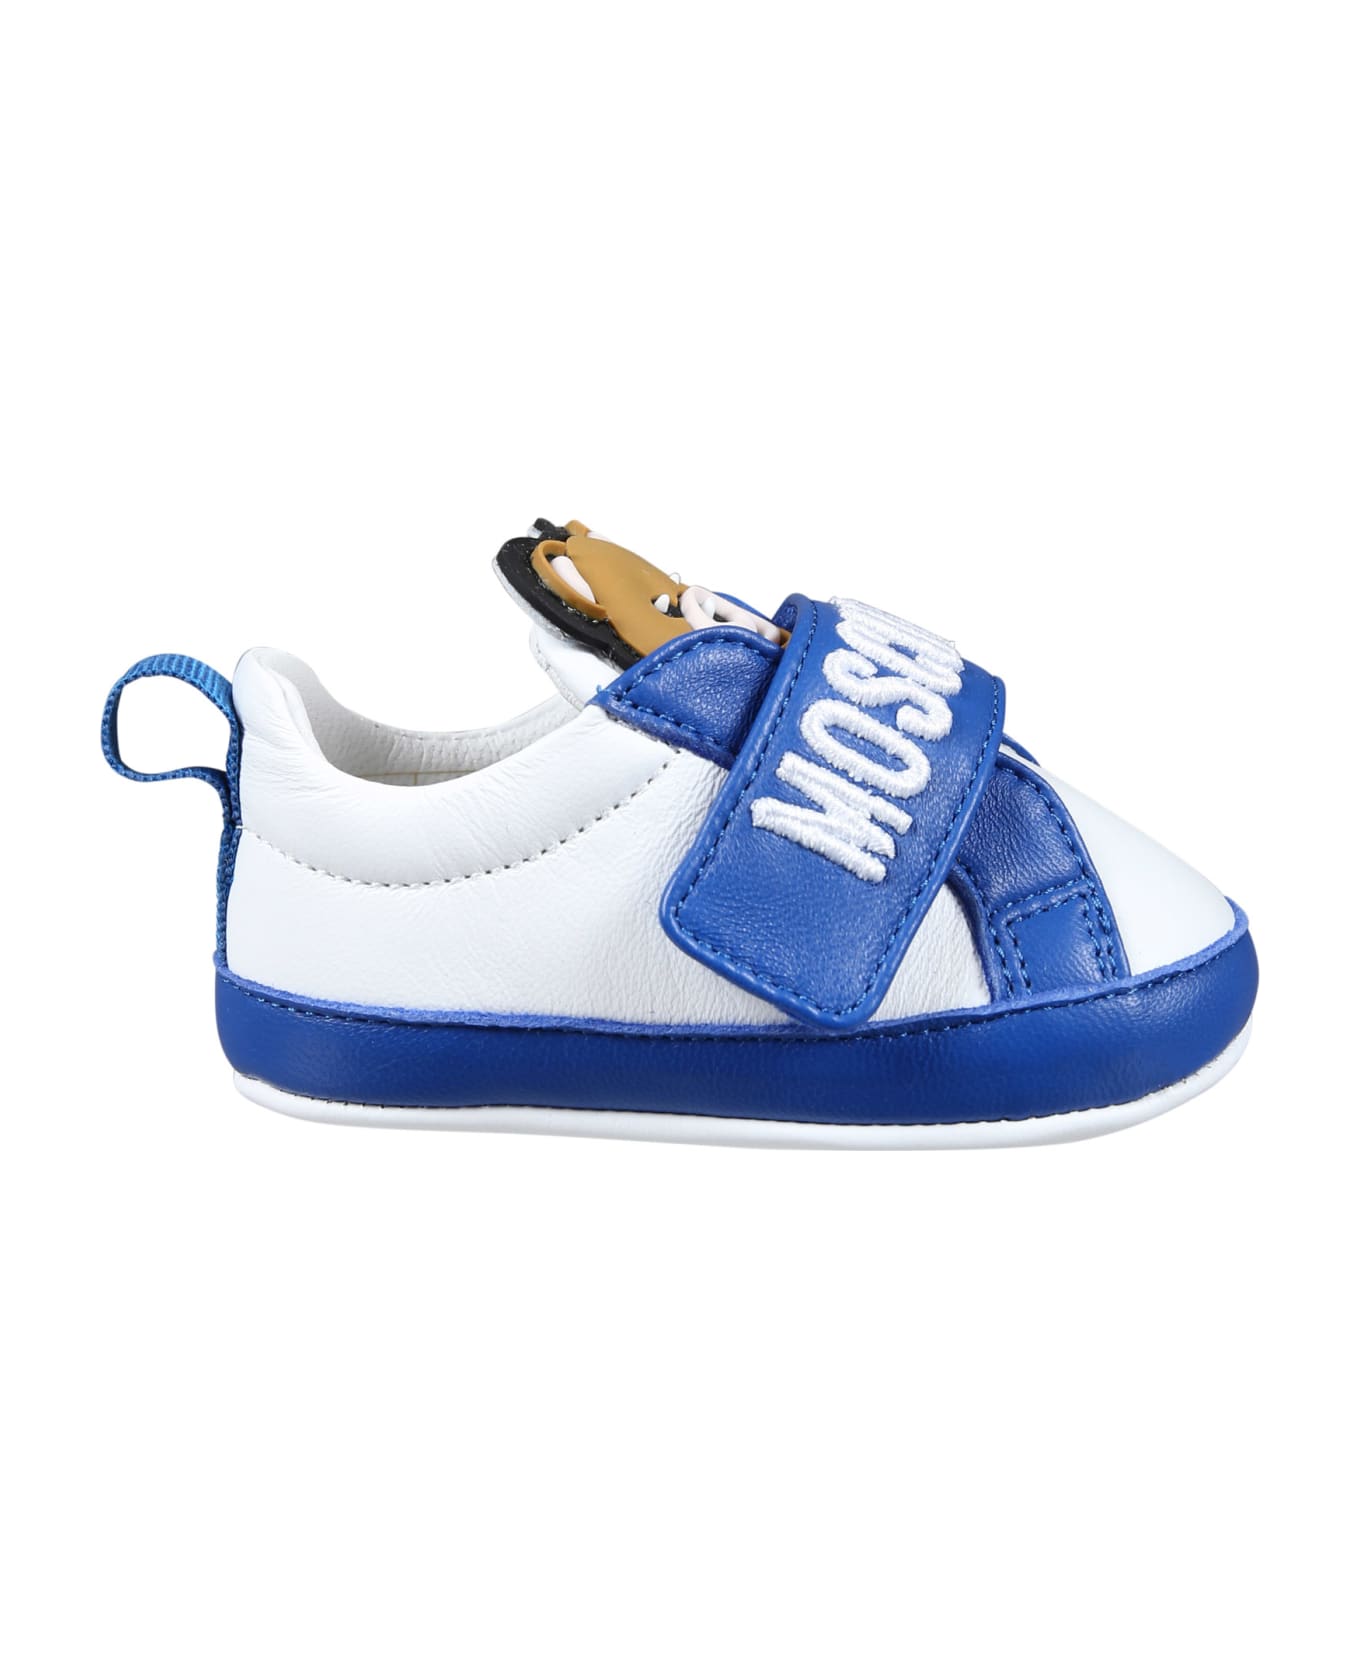 Moschino White Sneakers For Baby Boy With Teddy Bear - Light Blue シューズ